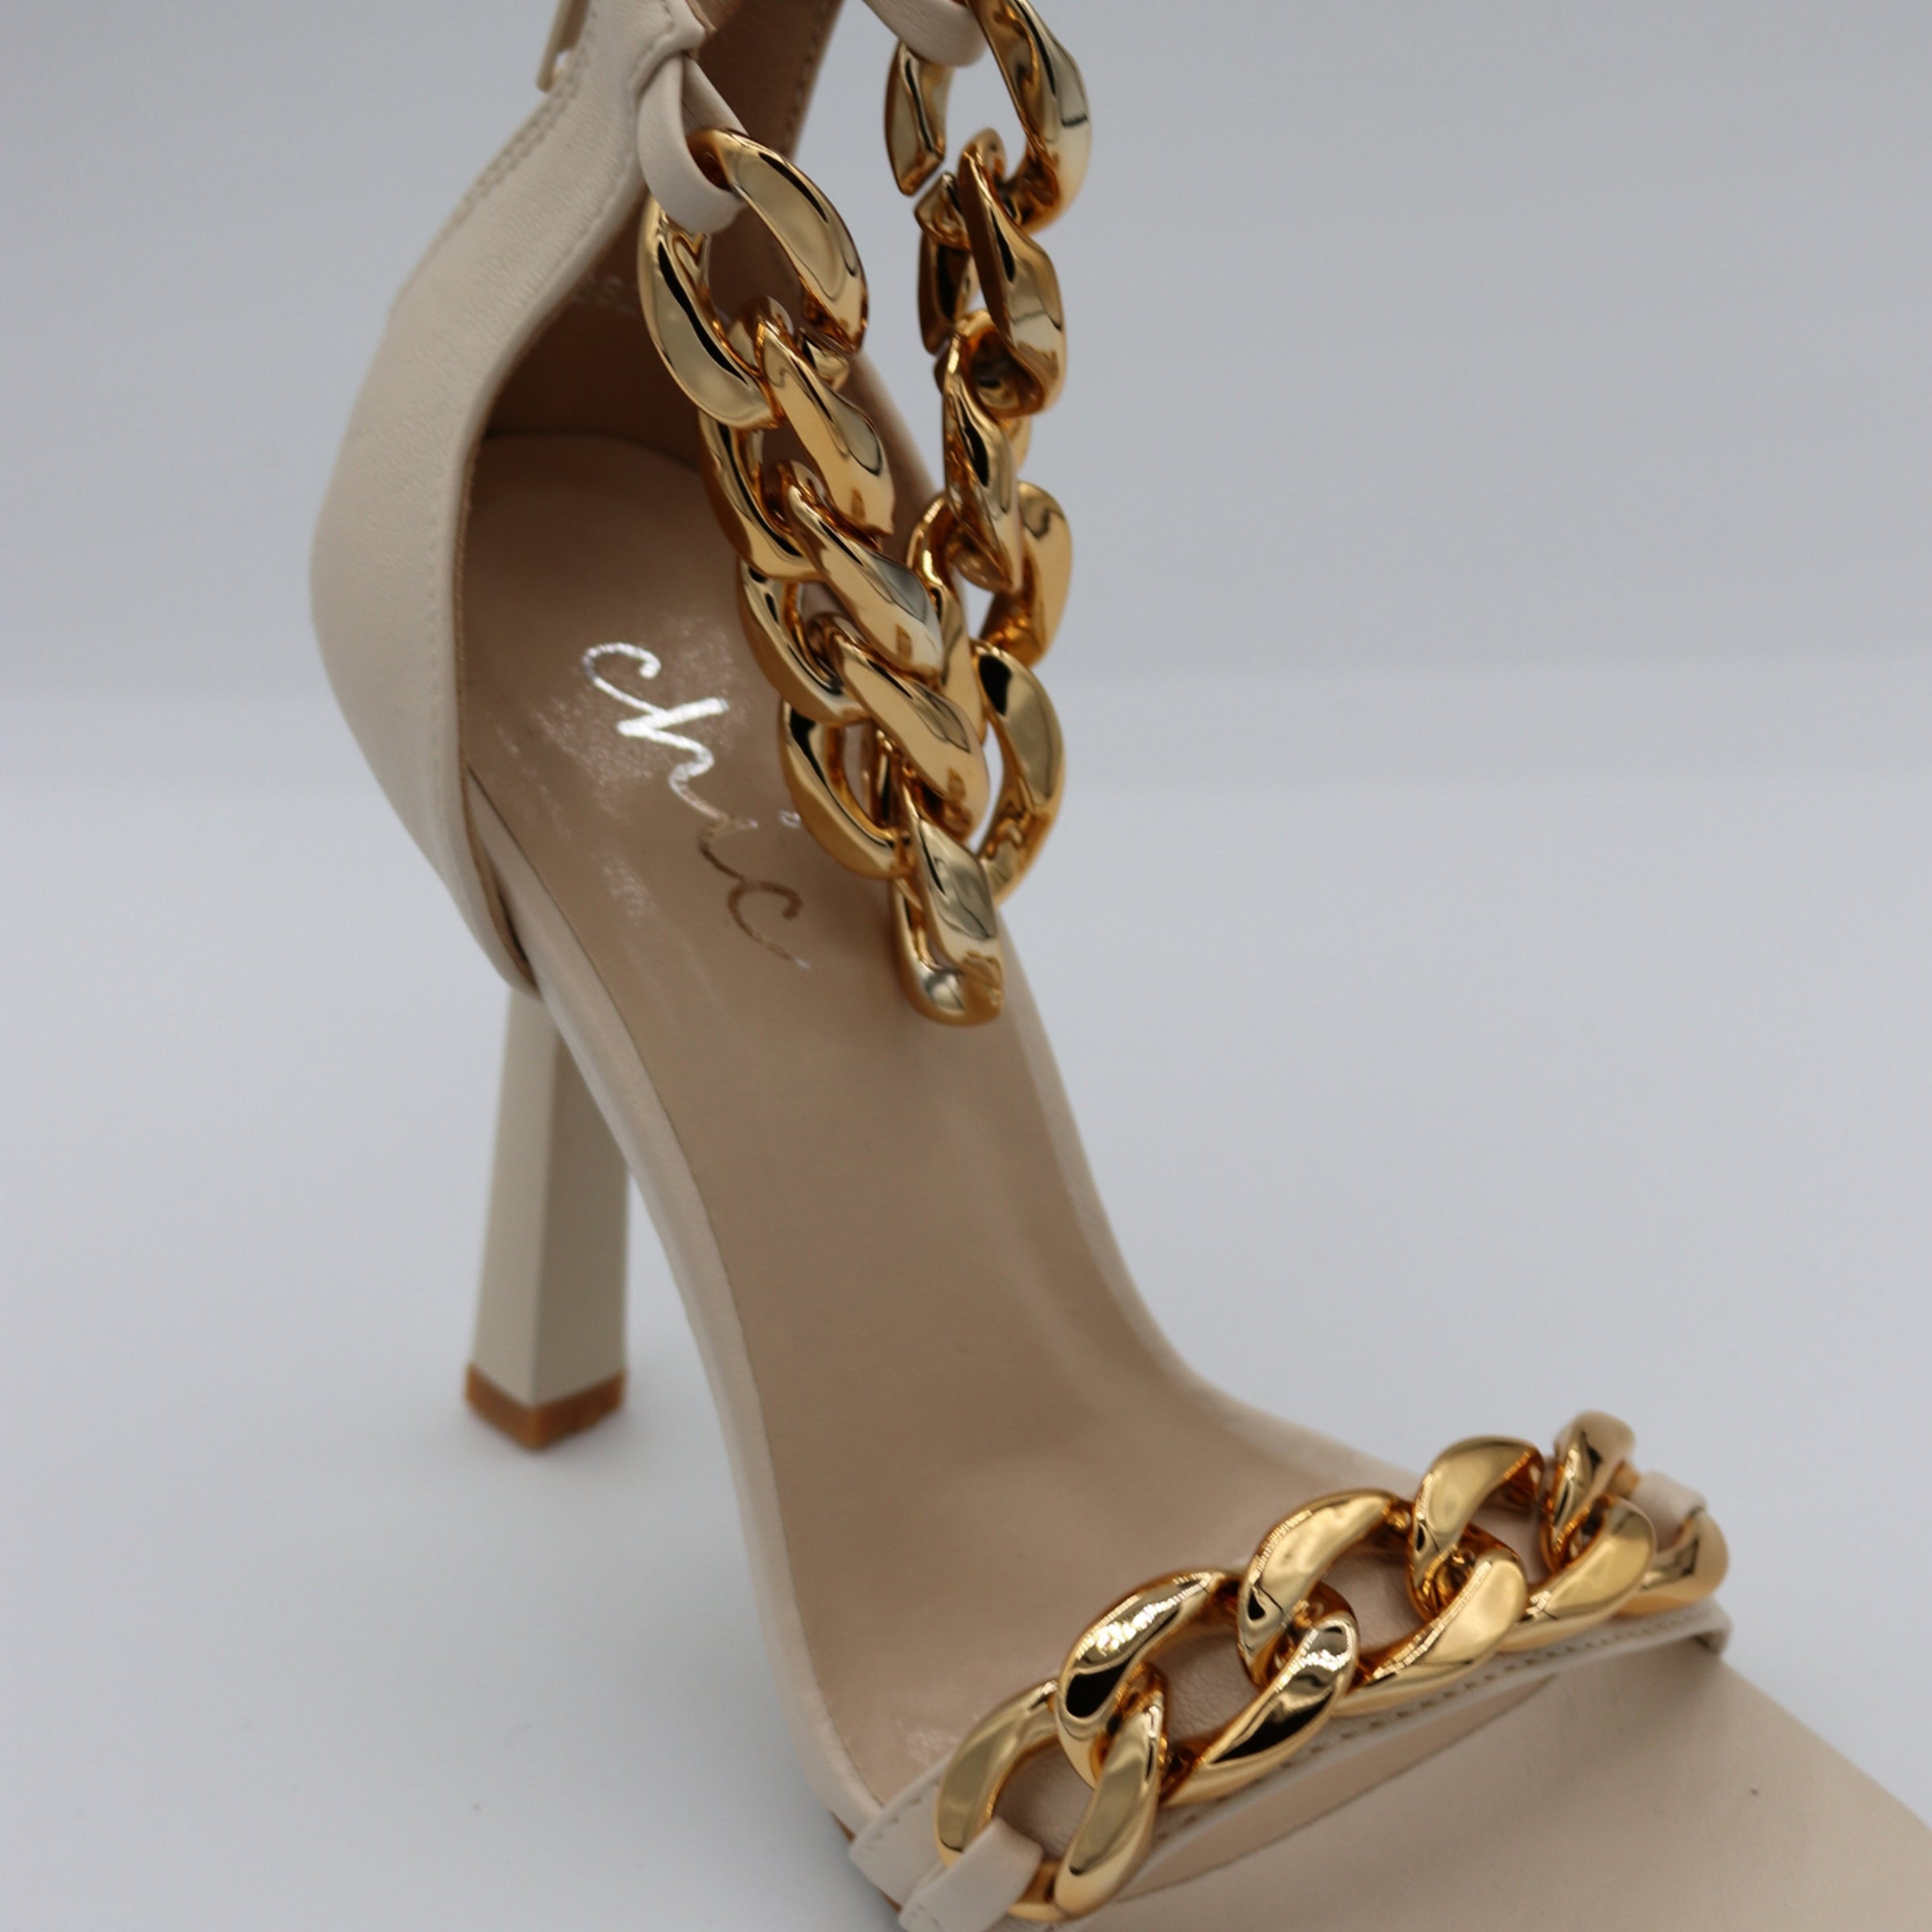 4ever Stunning Shoe Collection Tile. Close Up of a beige heeled shoe with a gold chain ankle strap.